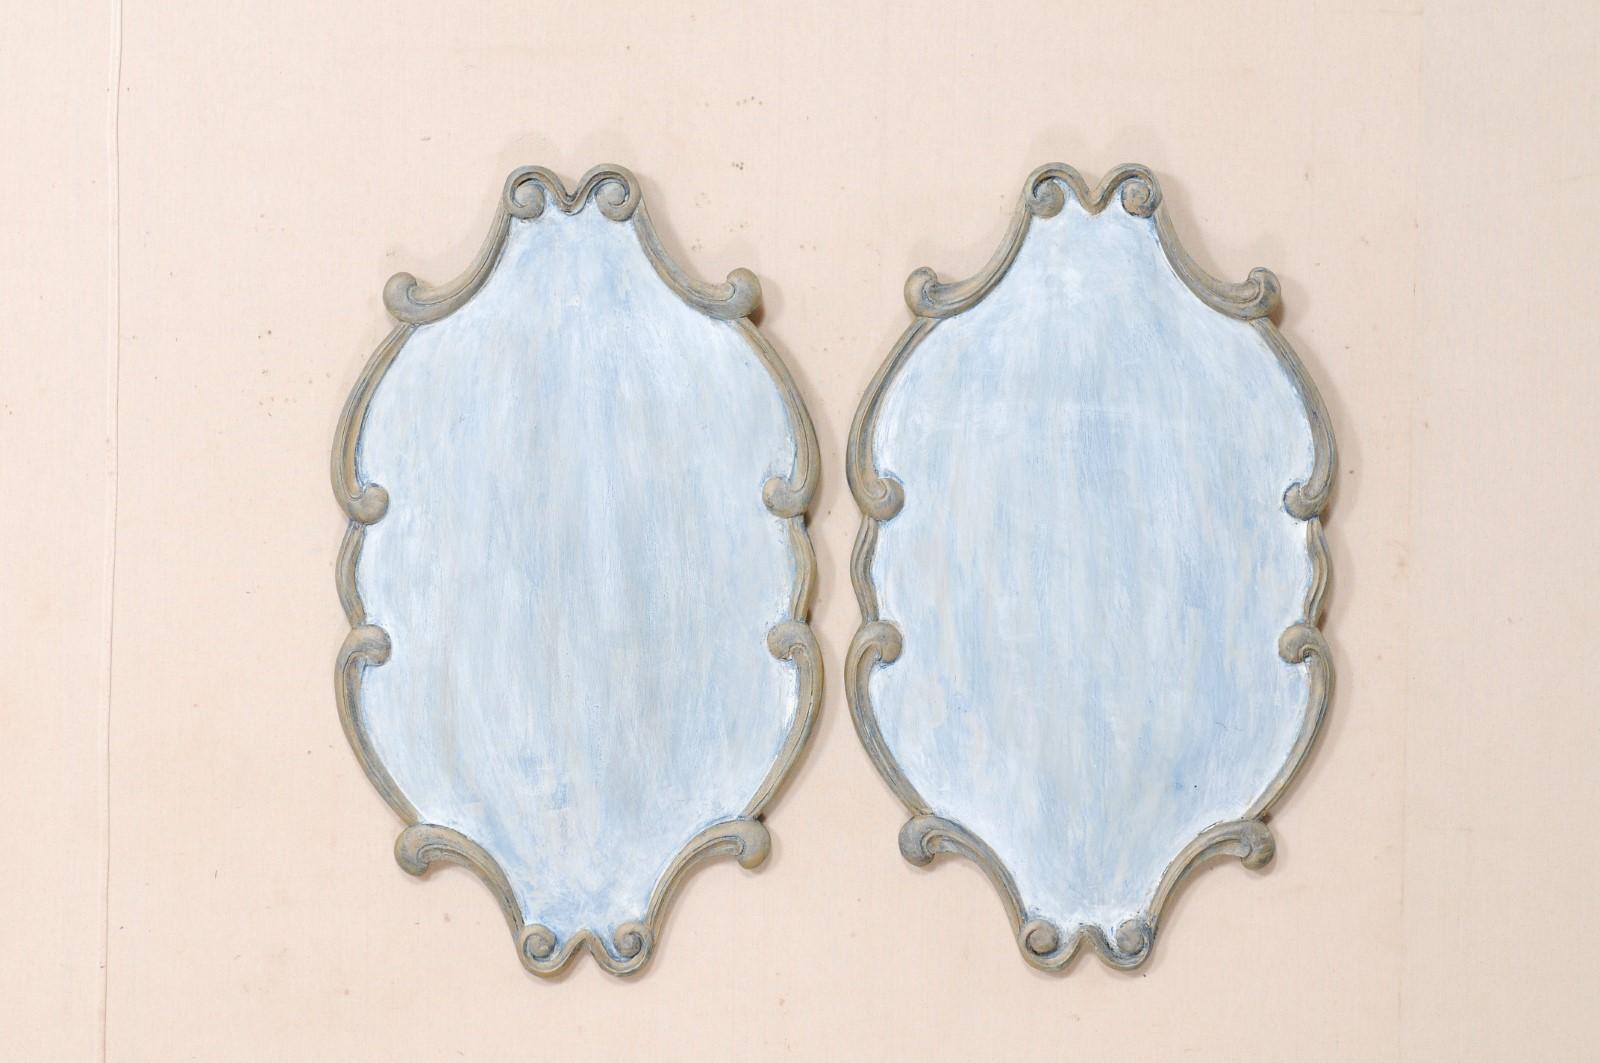 A pair of Italian style hand carved and painted wood hanging wall plaques. This pair of wall mounted wood plaques feature hand carved, mostly oval-shaped bodies, with a lovely boarder frame comprised of delicate carved loose scrolls. The wood has a